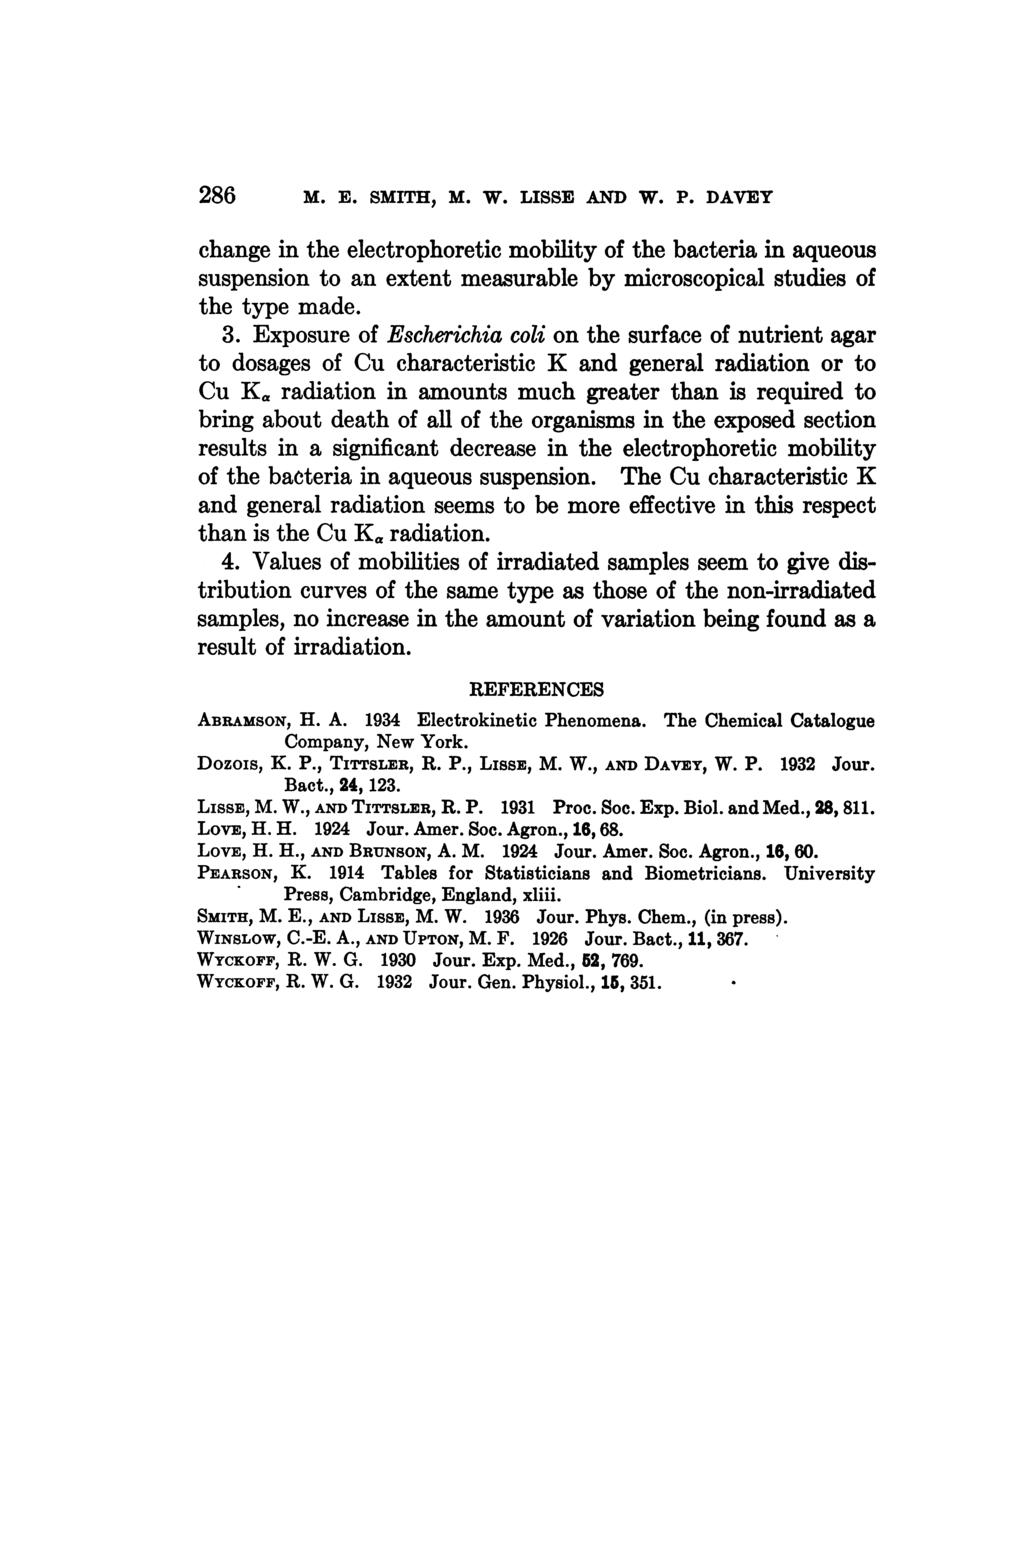 286 M. E. SMITH, M. W. LISSE AND W. P. DAVEY change in the electrophoretic mobility of the bacteria in aqueous suspension to an extent measurable by microscopical studies of the type made. 3.